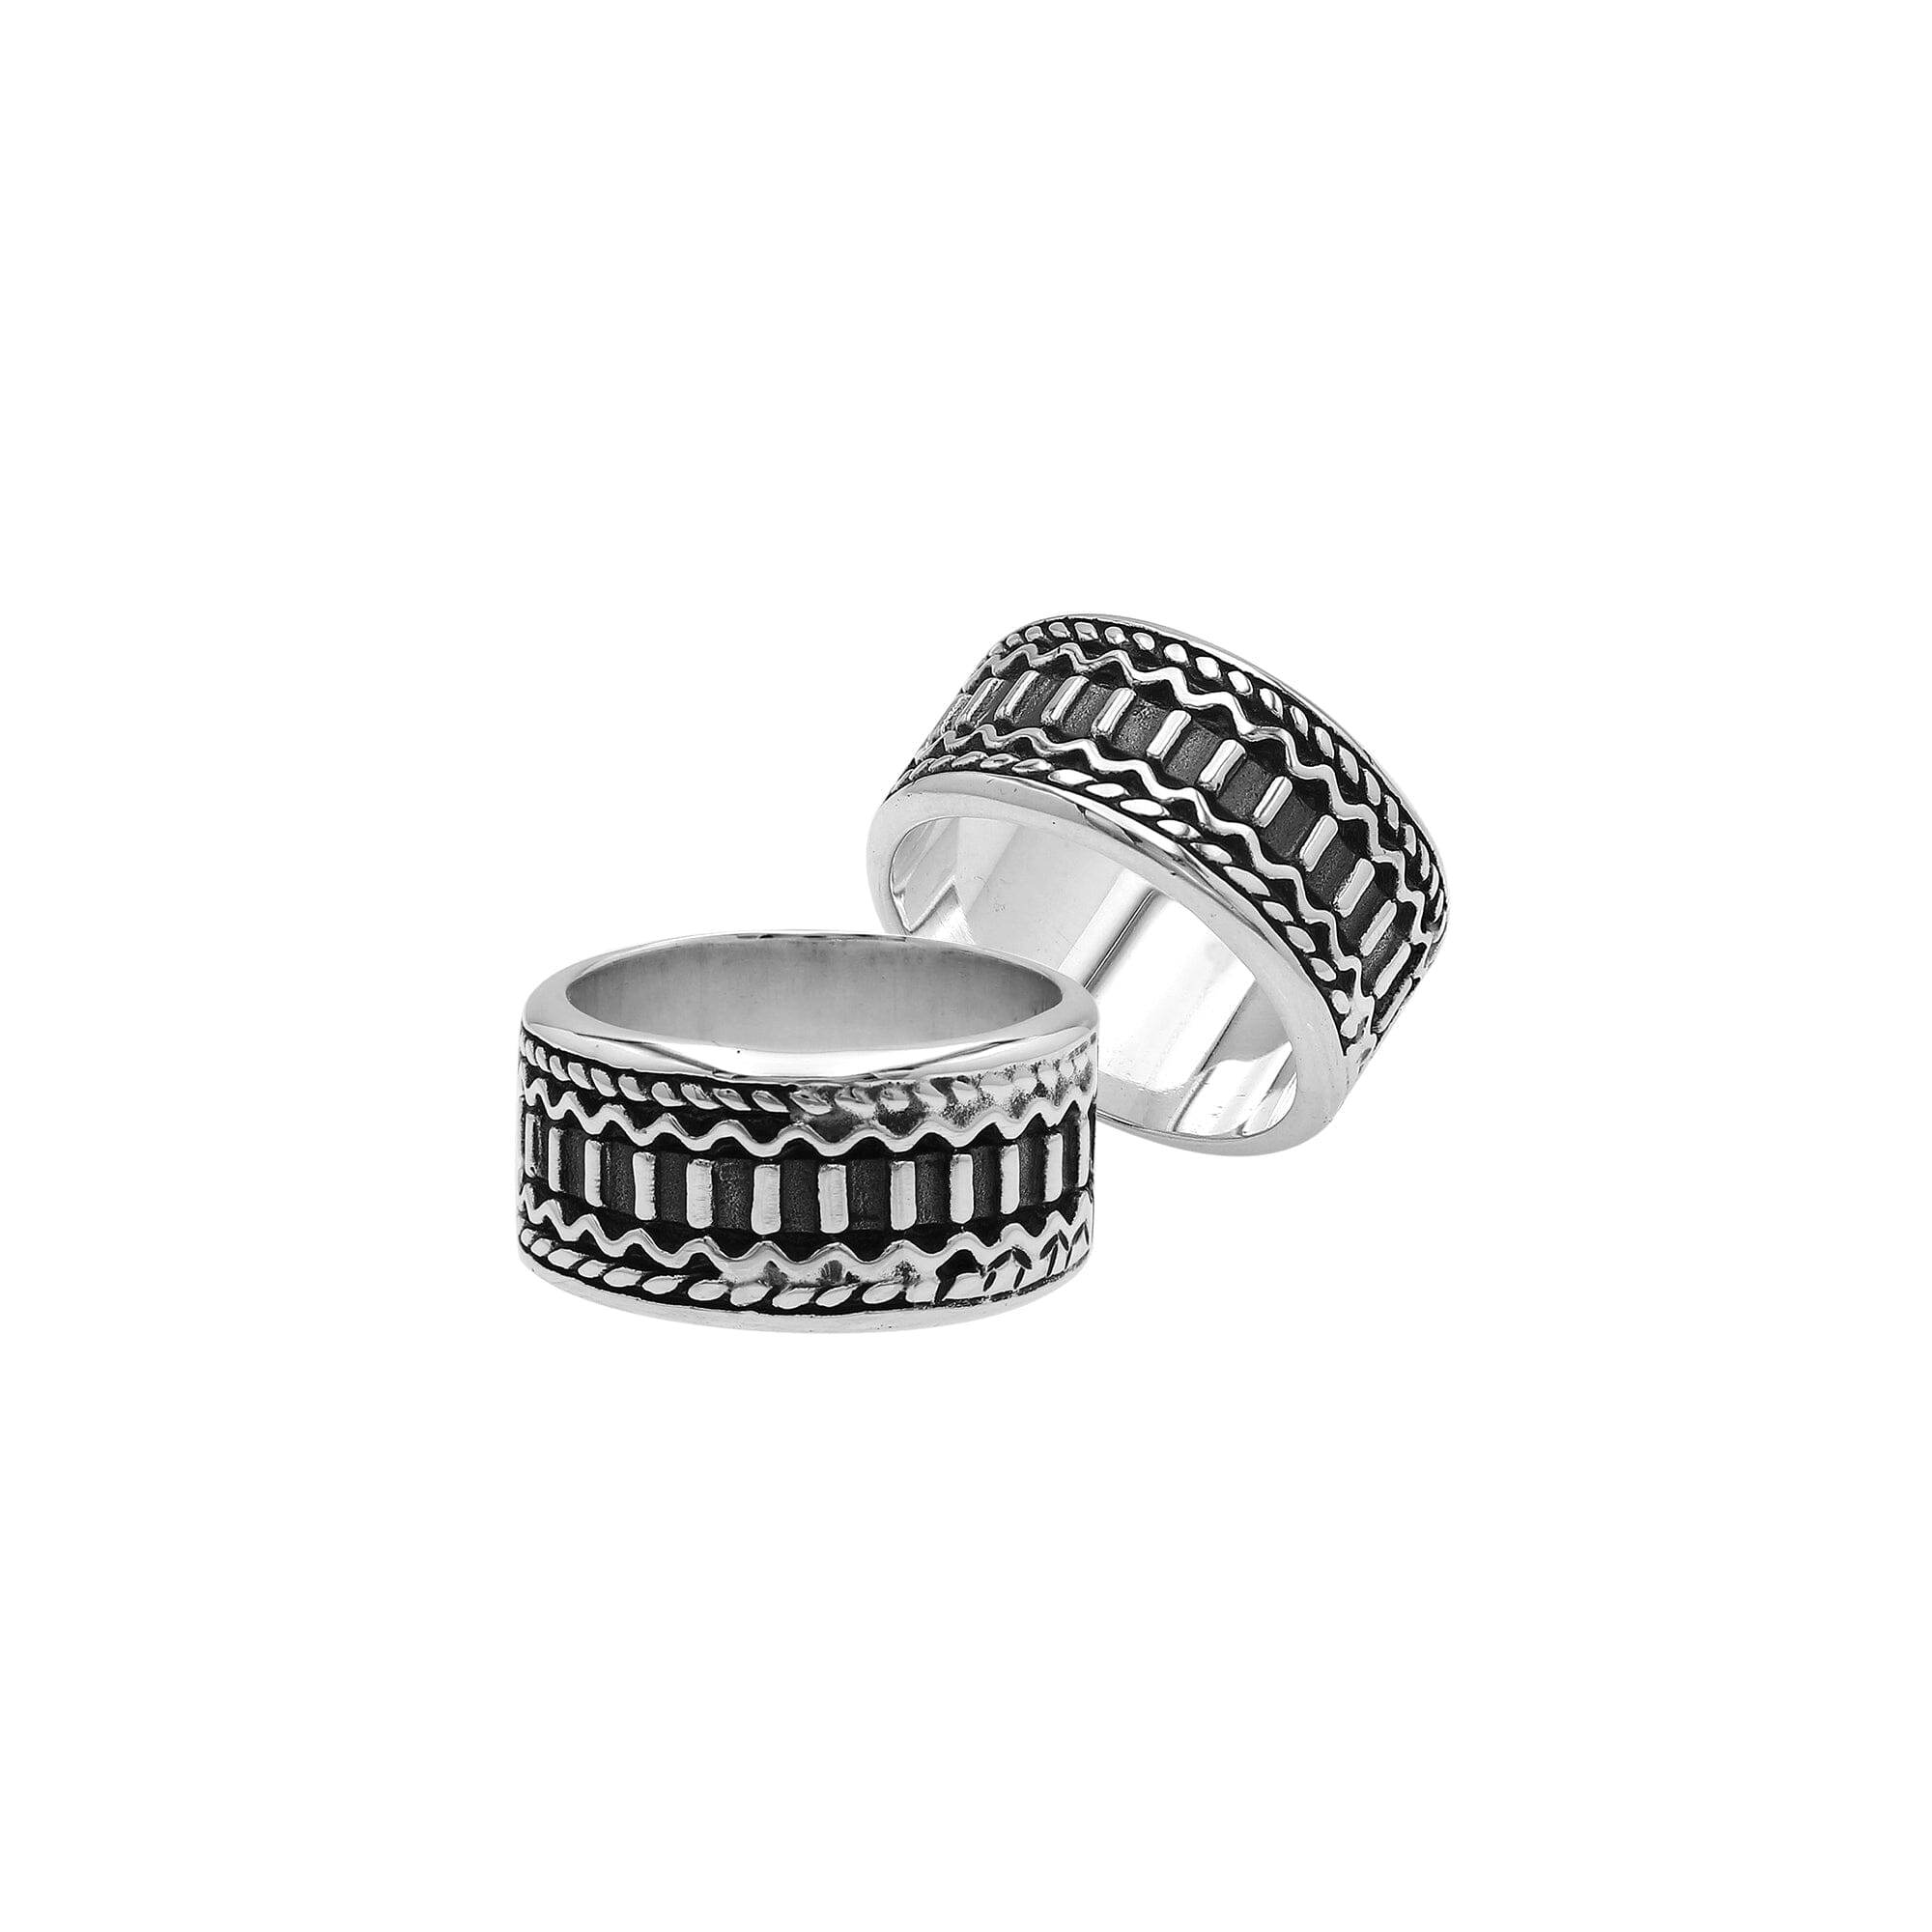 AR-1120-S-7 Sterling Silver Ring With Plain Silver